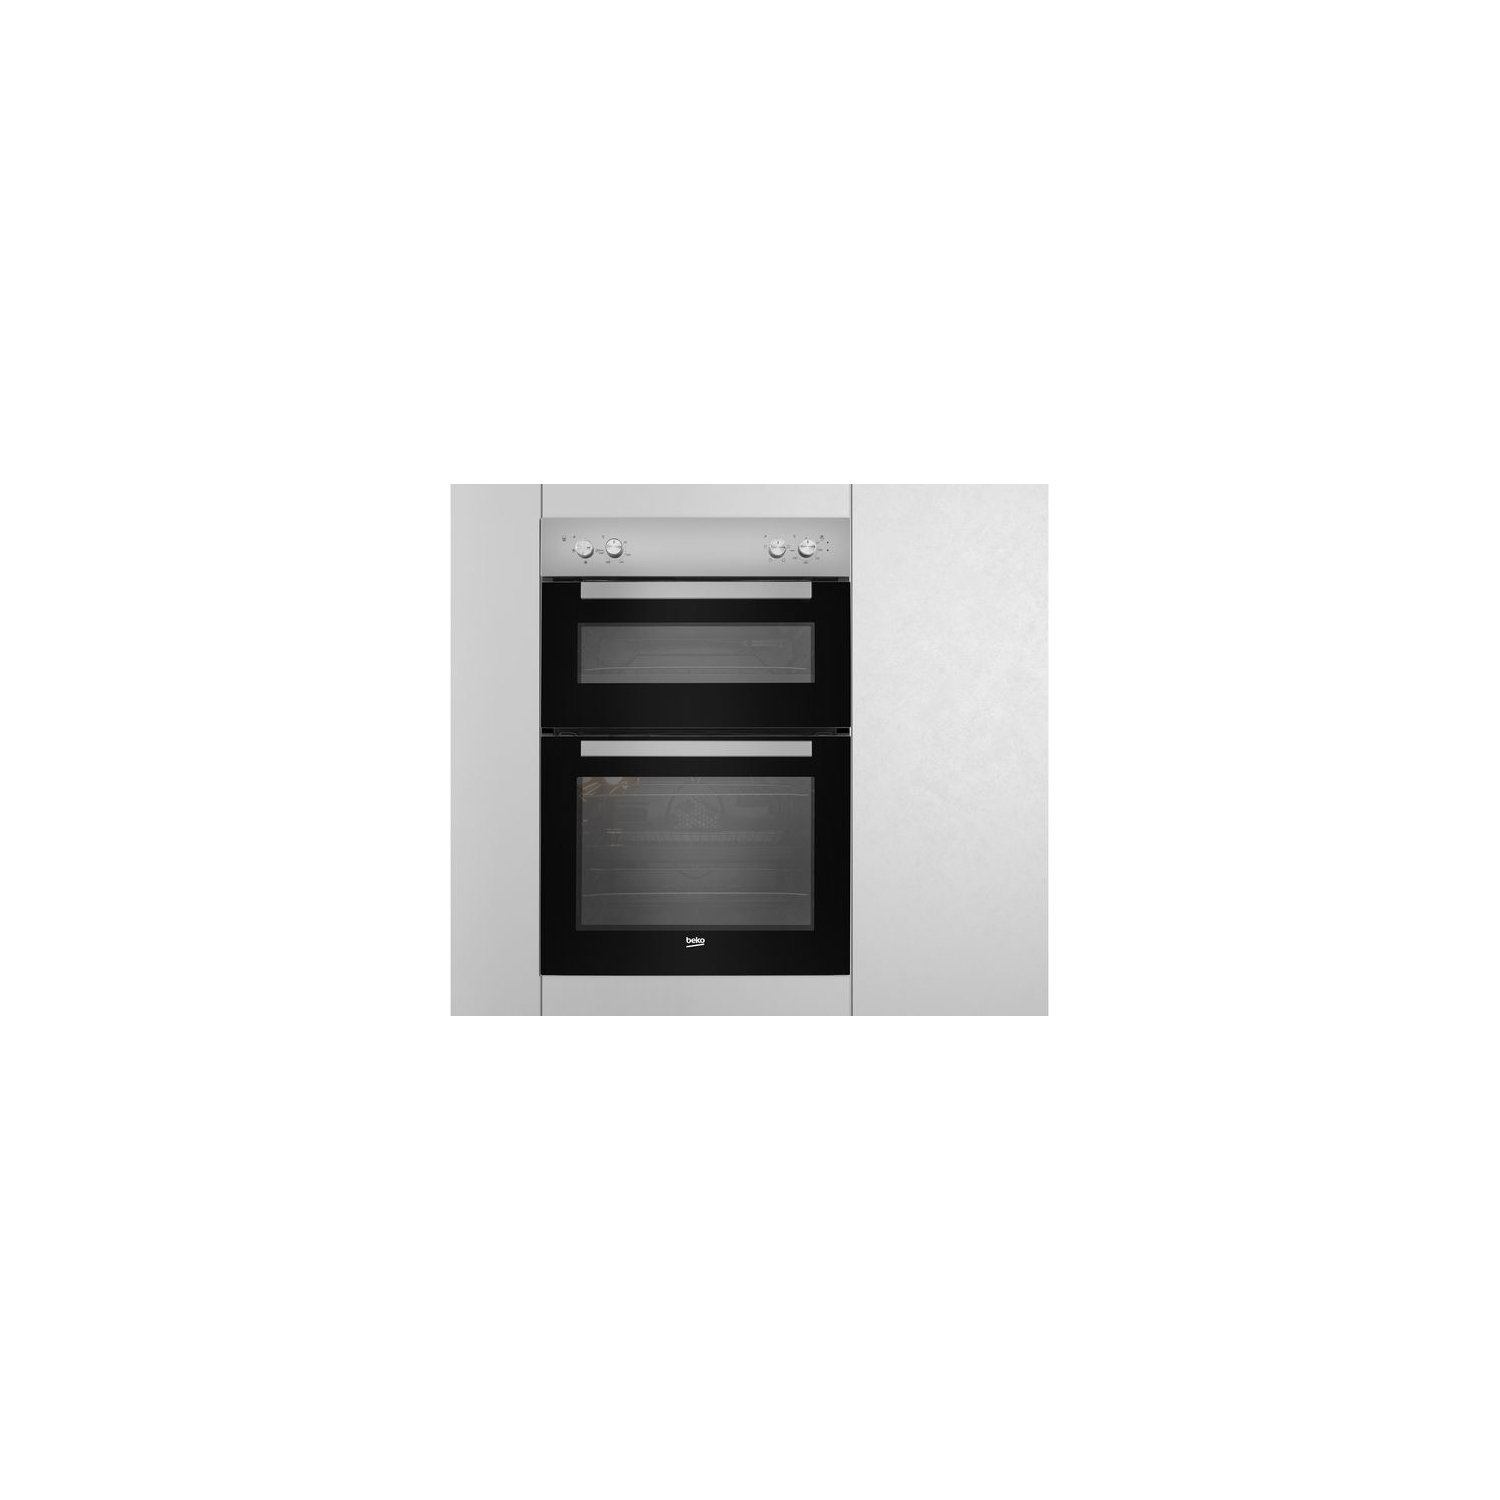 Beko Electric Double Oven - Silver - A Rated - 3